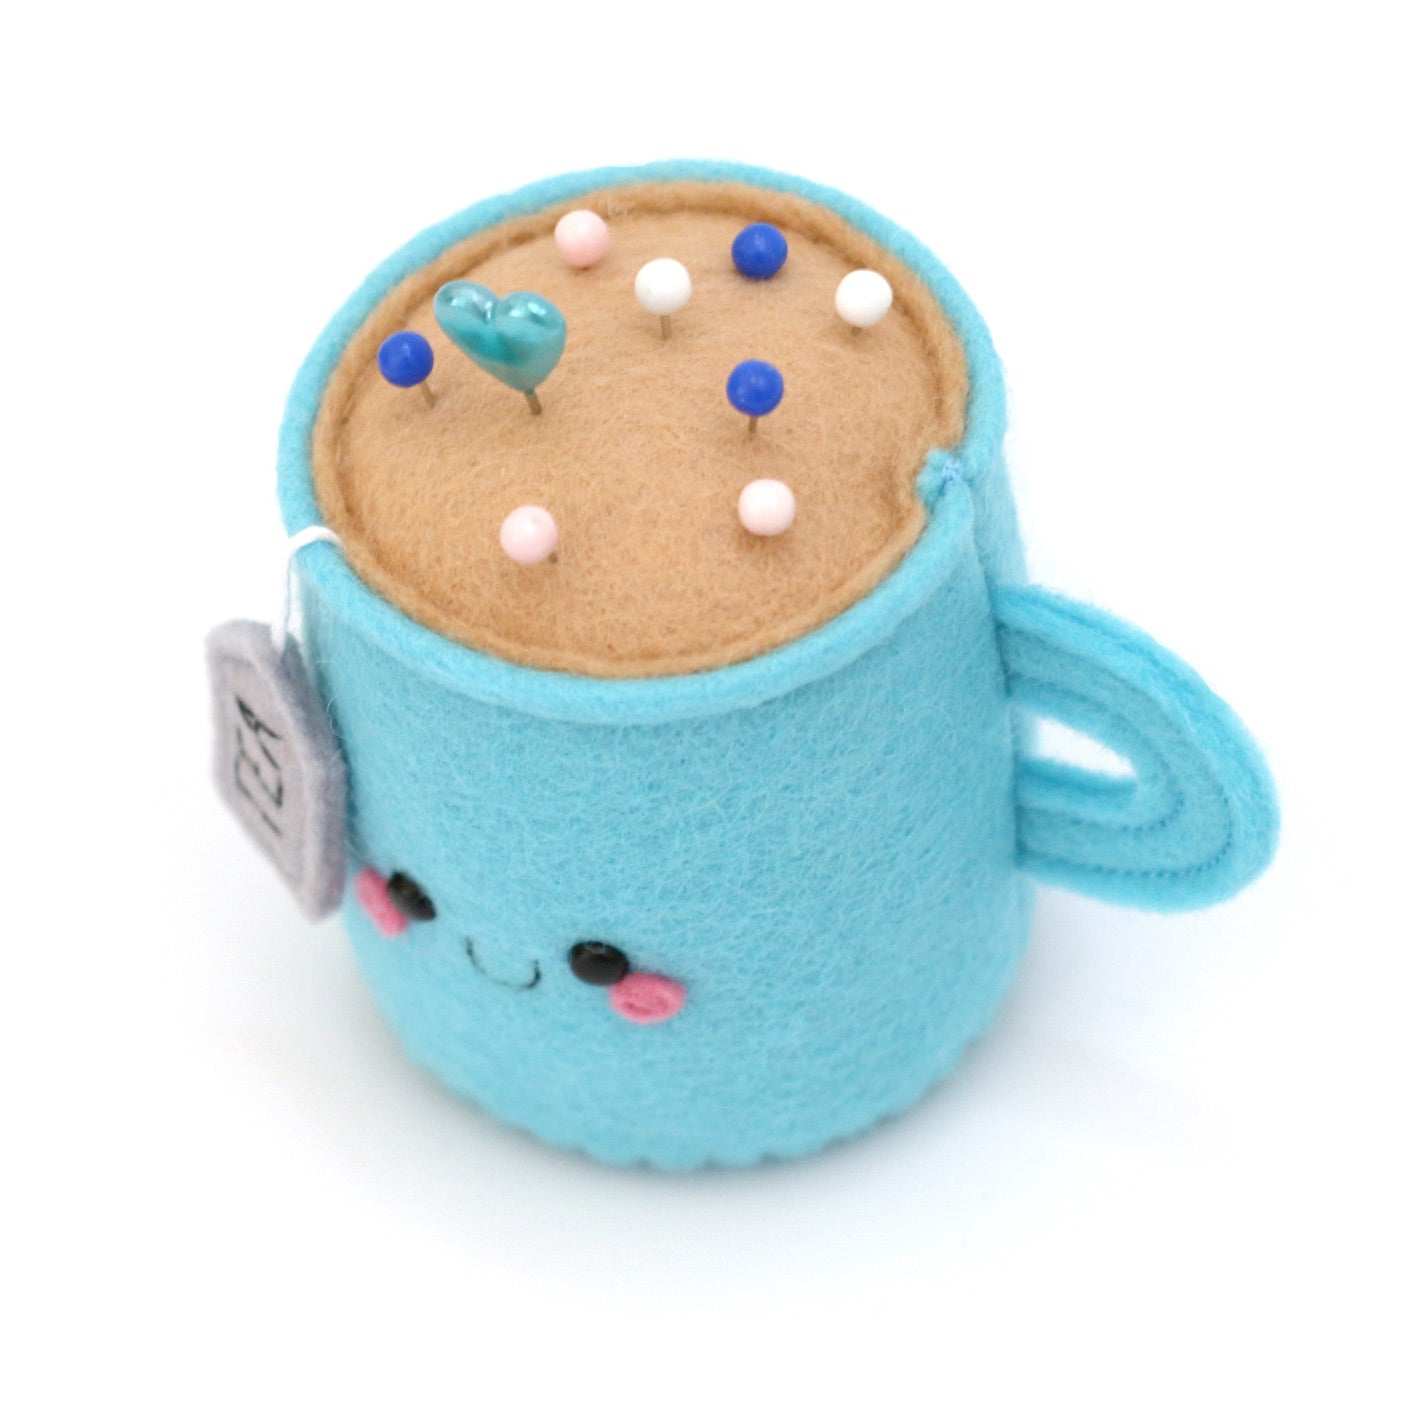 Pincushion shaped like a teacup holding various sewing pins